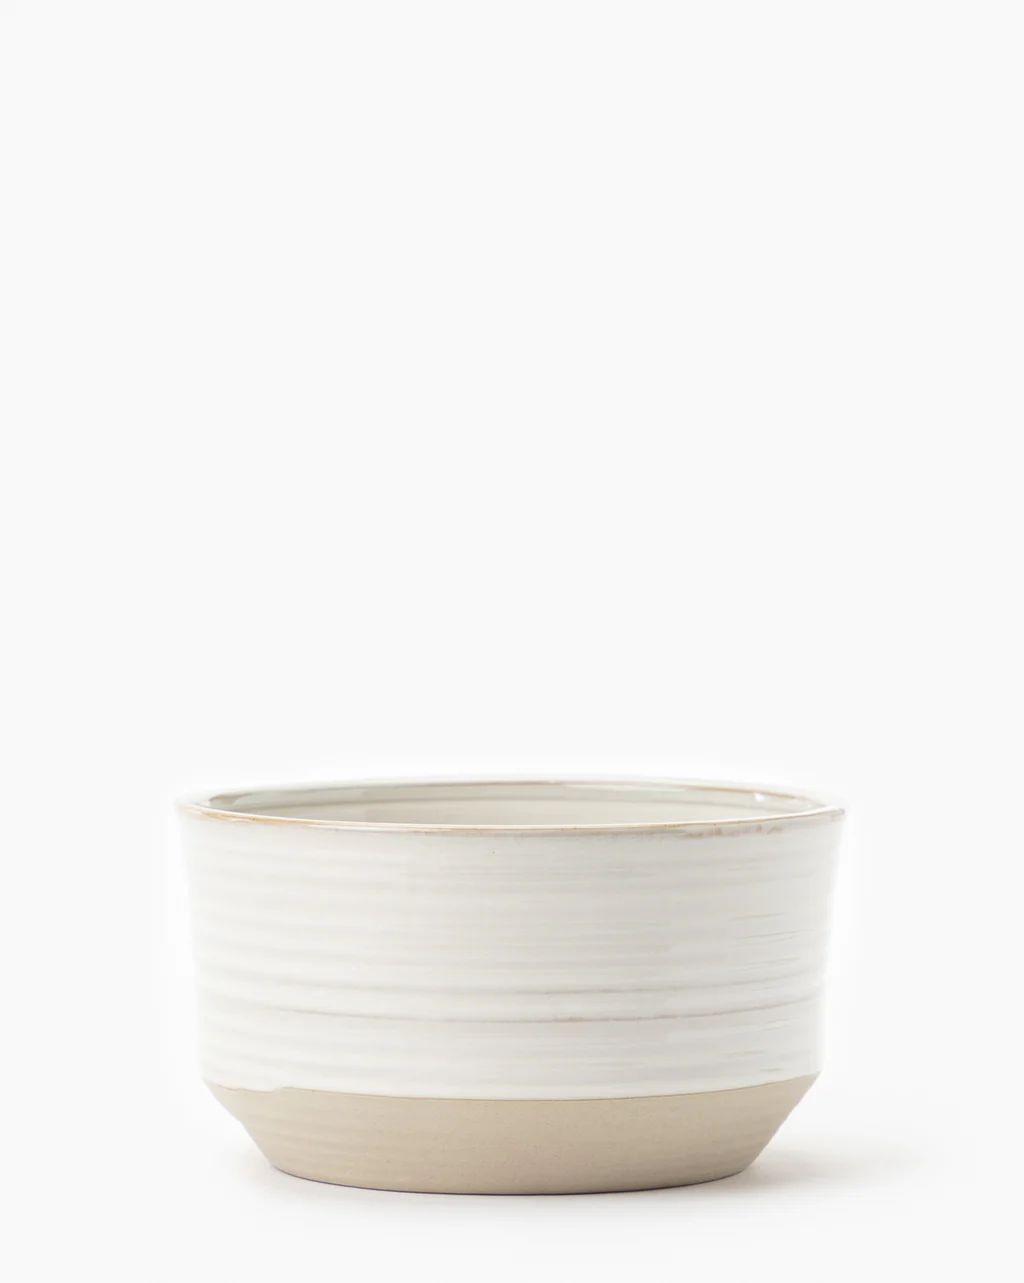 Hood Dipped Stoneware Planter | McGee & Co.